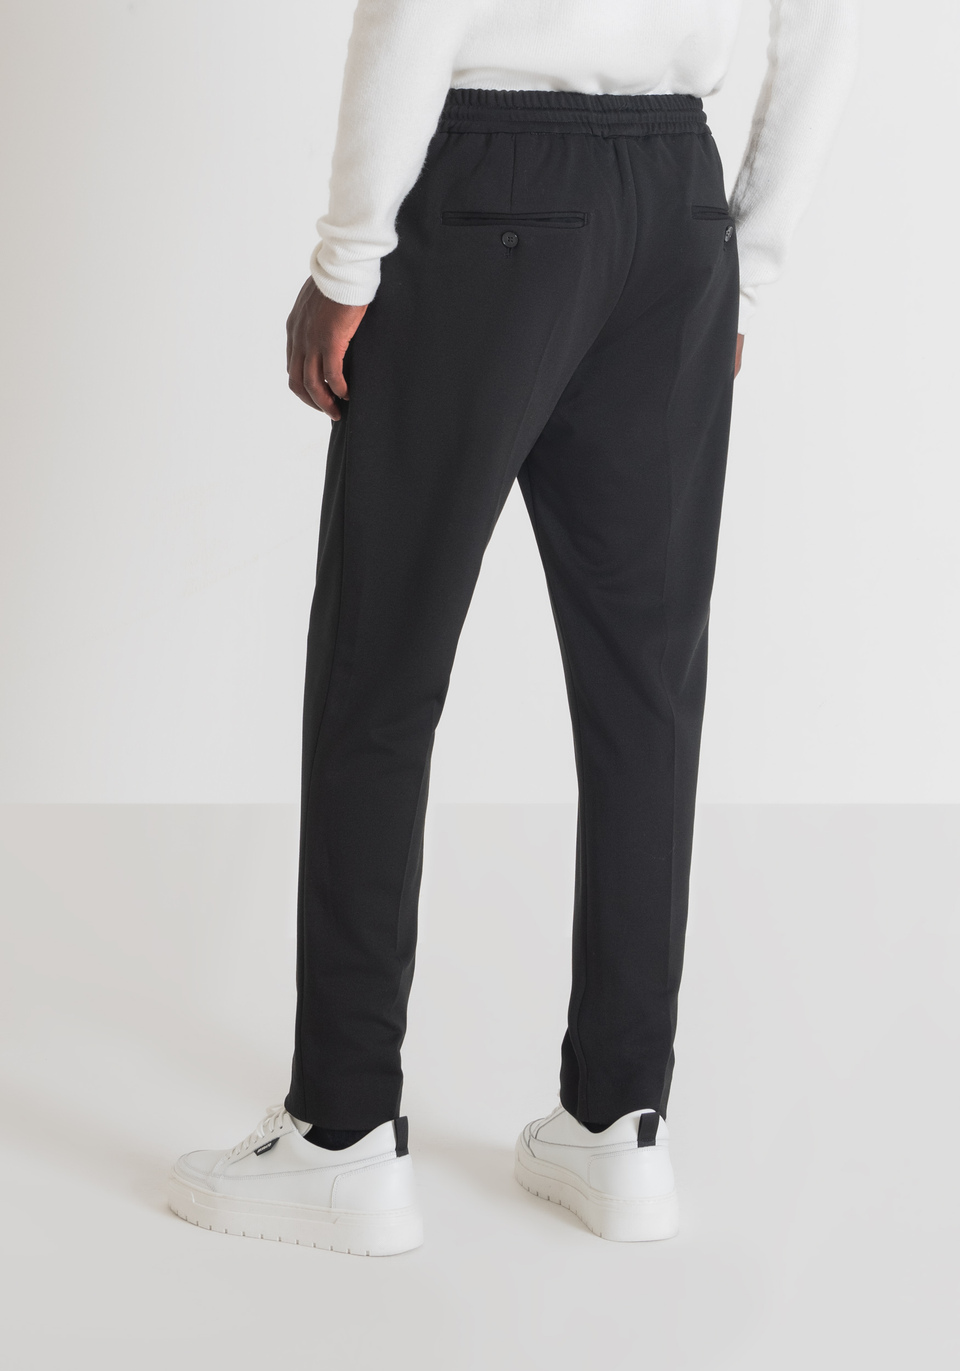 "NEI" REGULAR-FIT TROUSERS WITH ELASTIC AND DRAWSTRING - Antony Morato Online Shop